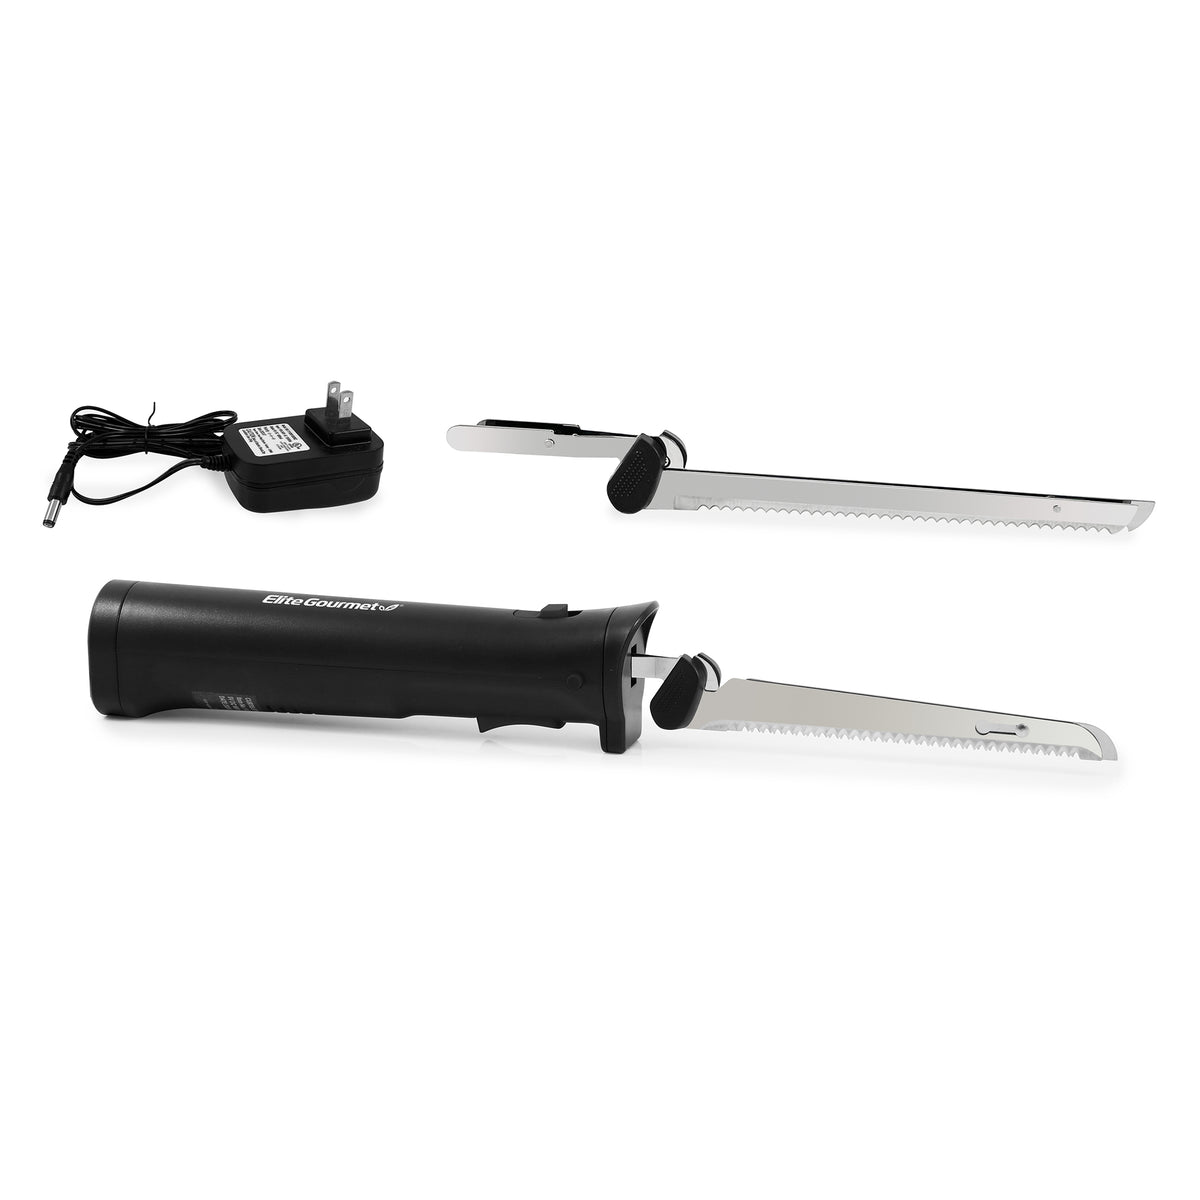  ENERTWIST Cordless Electric Carving Knife 1S Quick